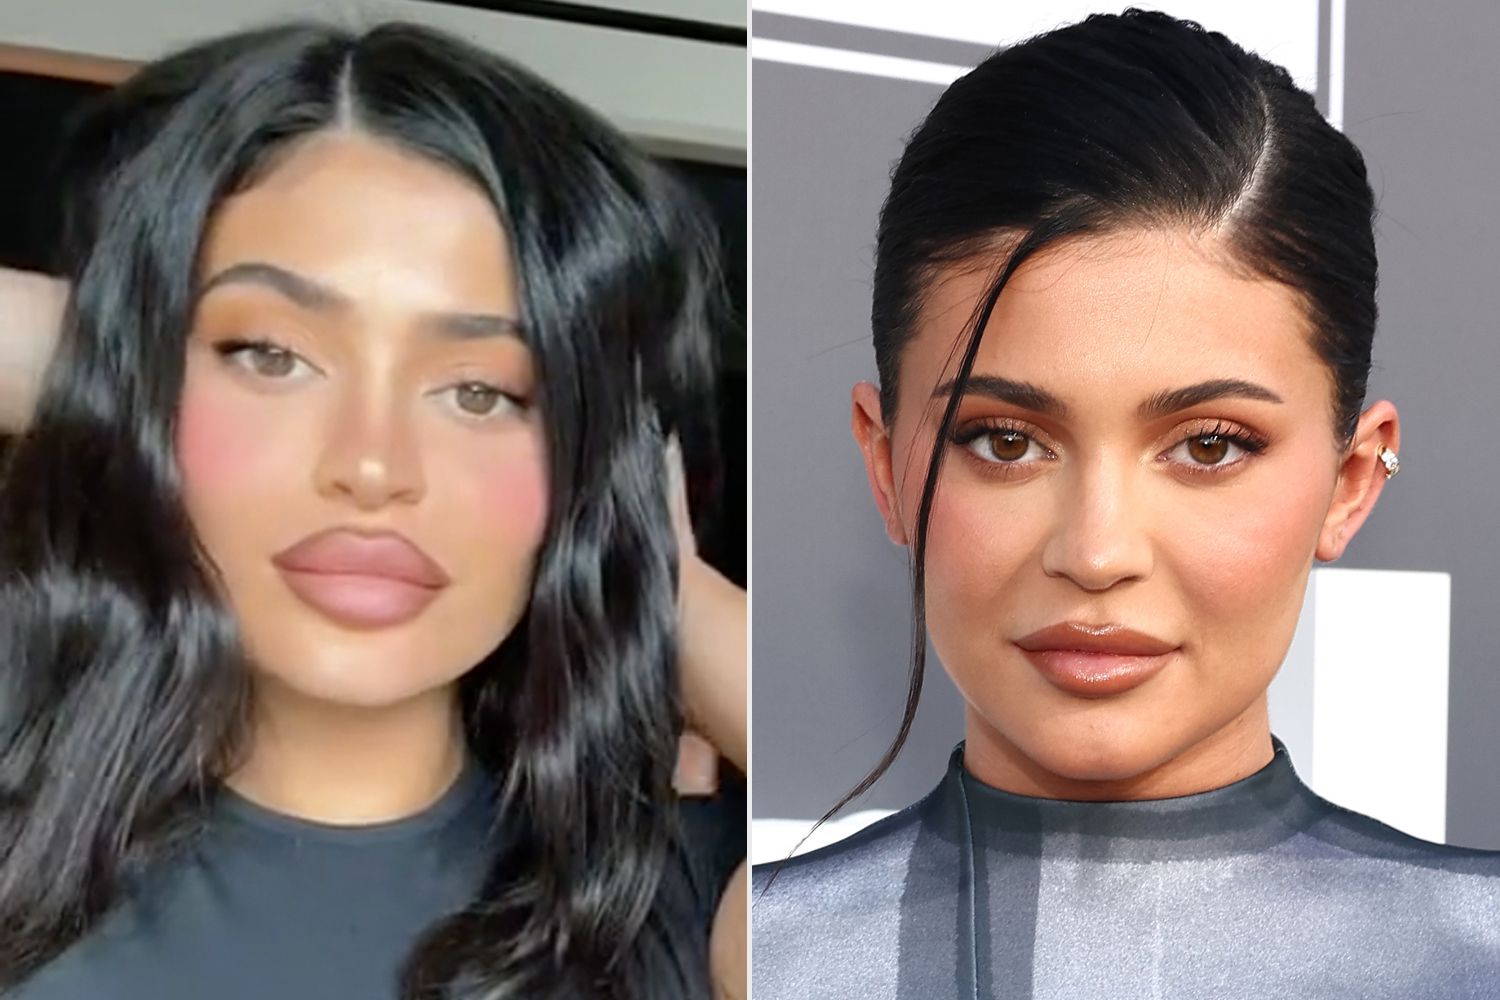 What Happens If You Do The Kylie Jenner Lip Challenge?